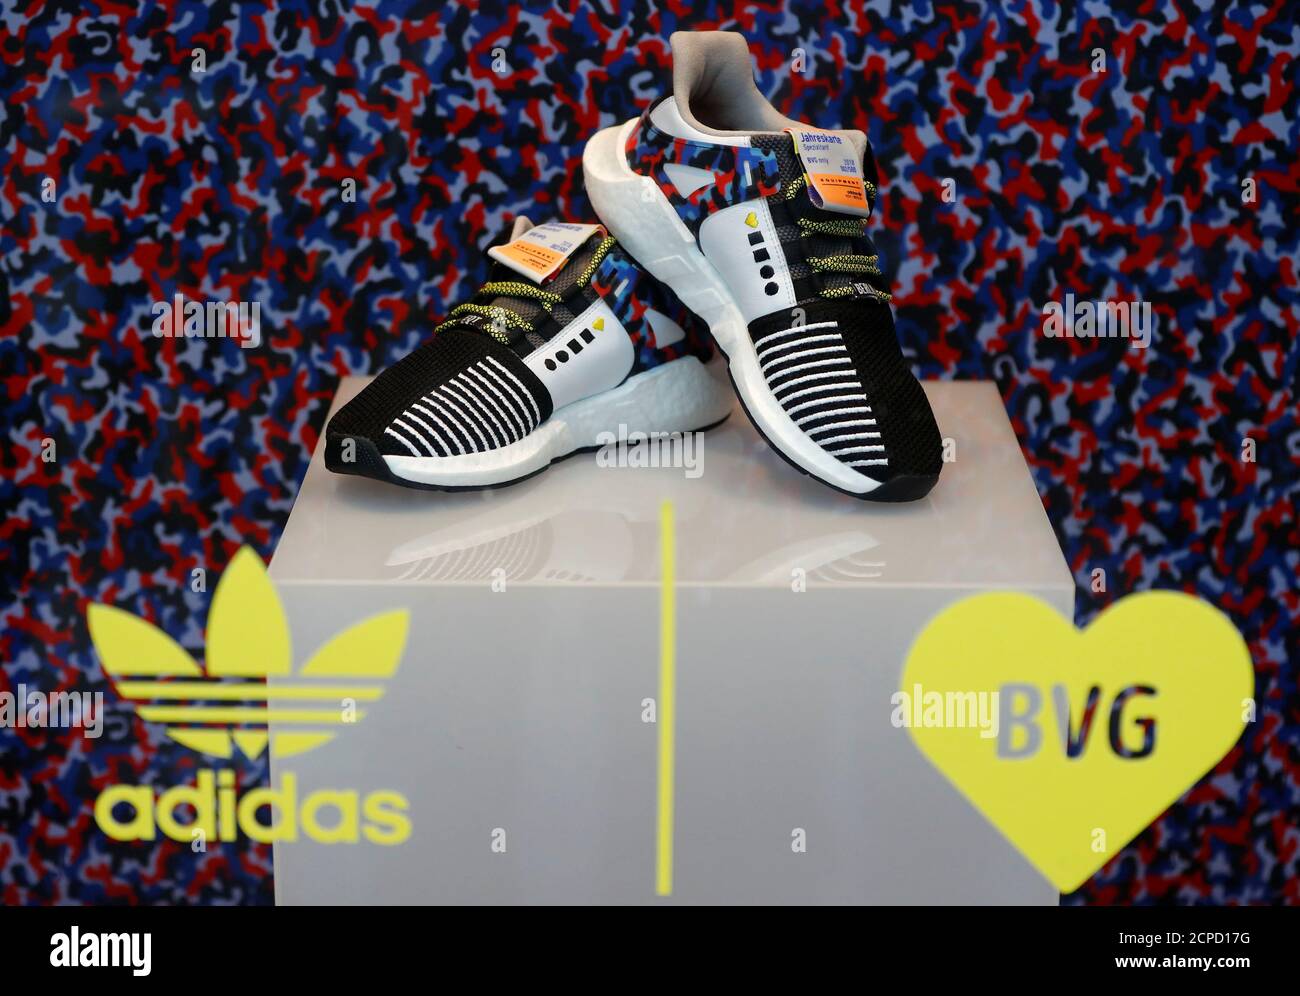 The Adidas limited-edition sneakers that match the Berlin subway seat  design, and include a yearly travel pass, are displayed at the 'Overkill'  shoe store in Berlin, Germany January 16, 2018. REUTERS/Fabrizio Bensch